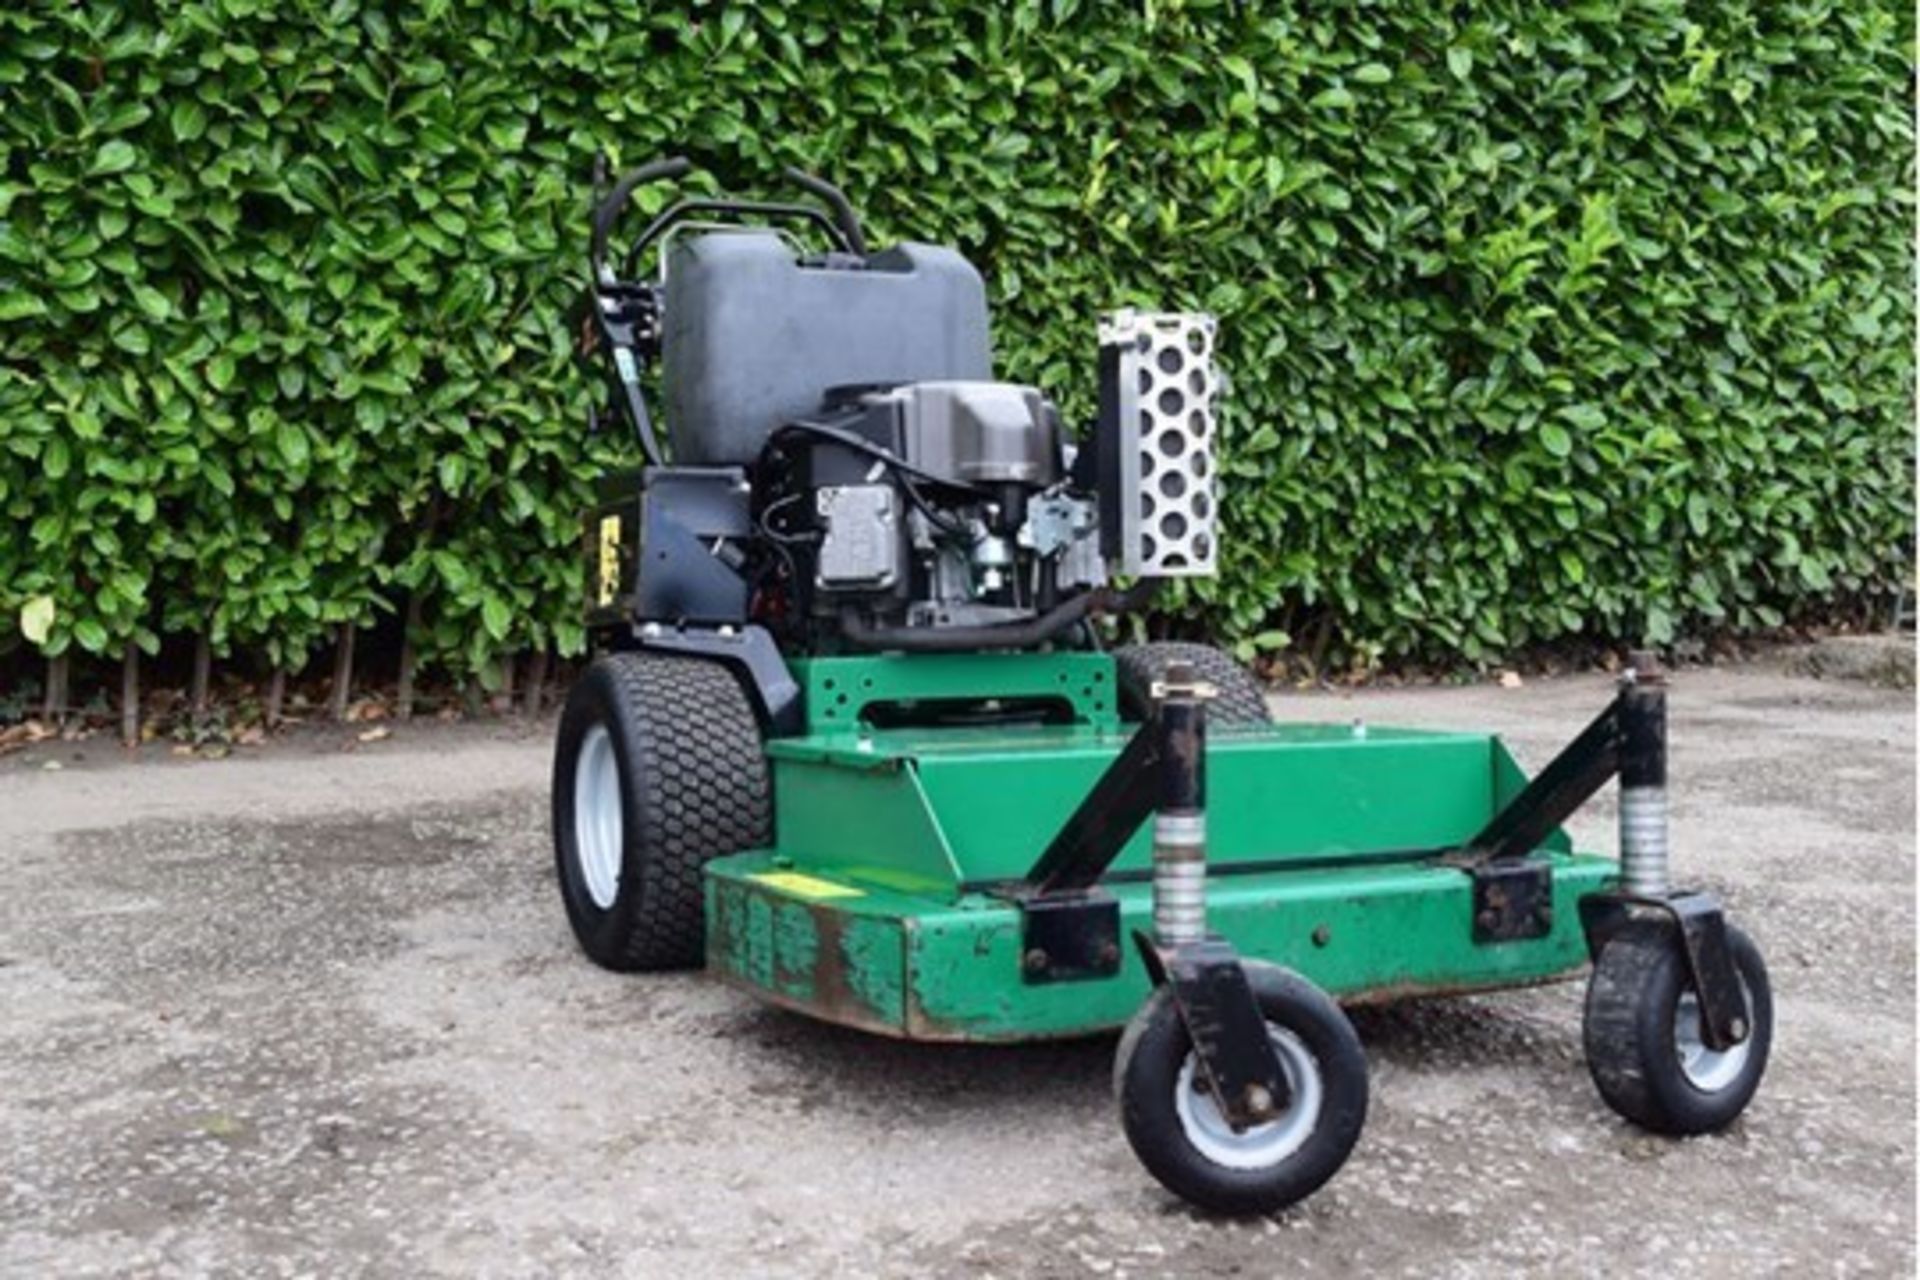 2011 Ransomes Pedestrian 36" Commercial Mower - Image 7 of 8